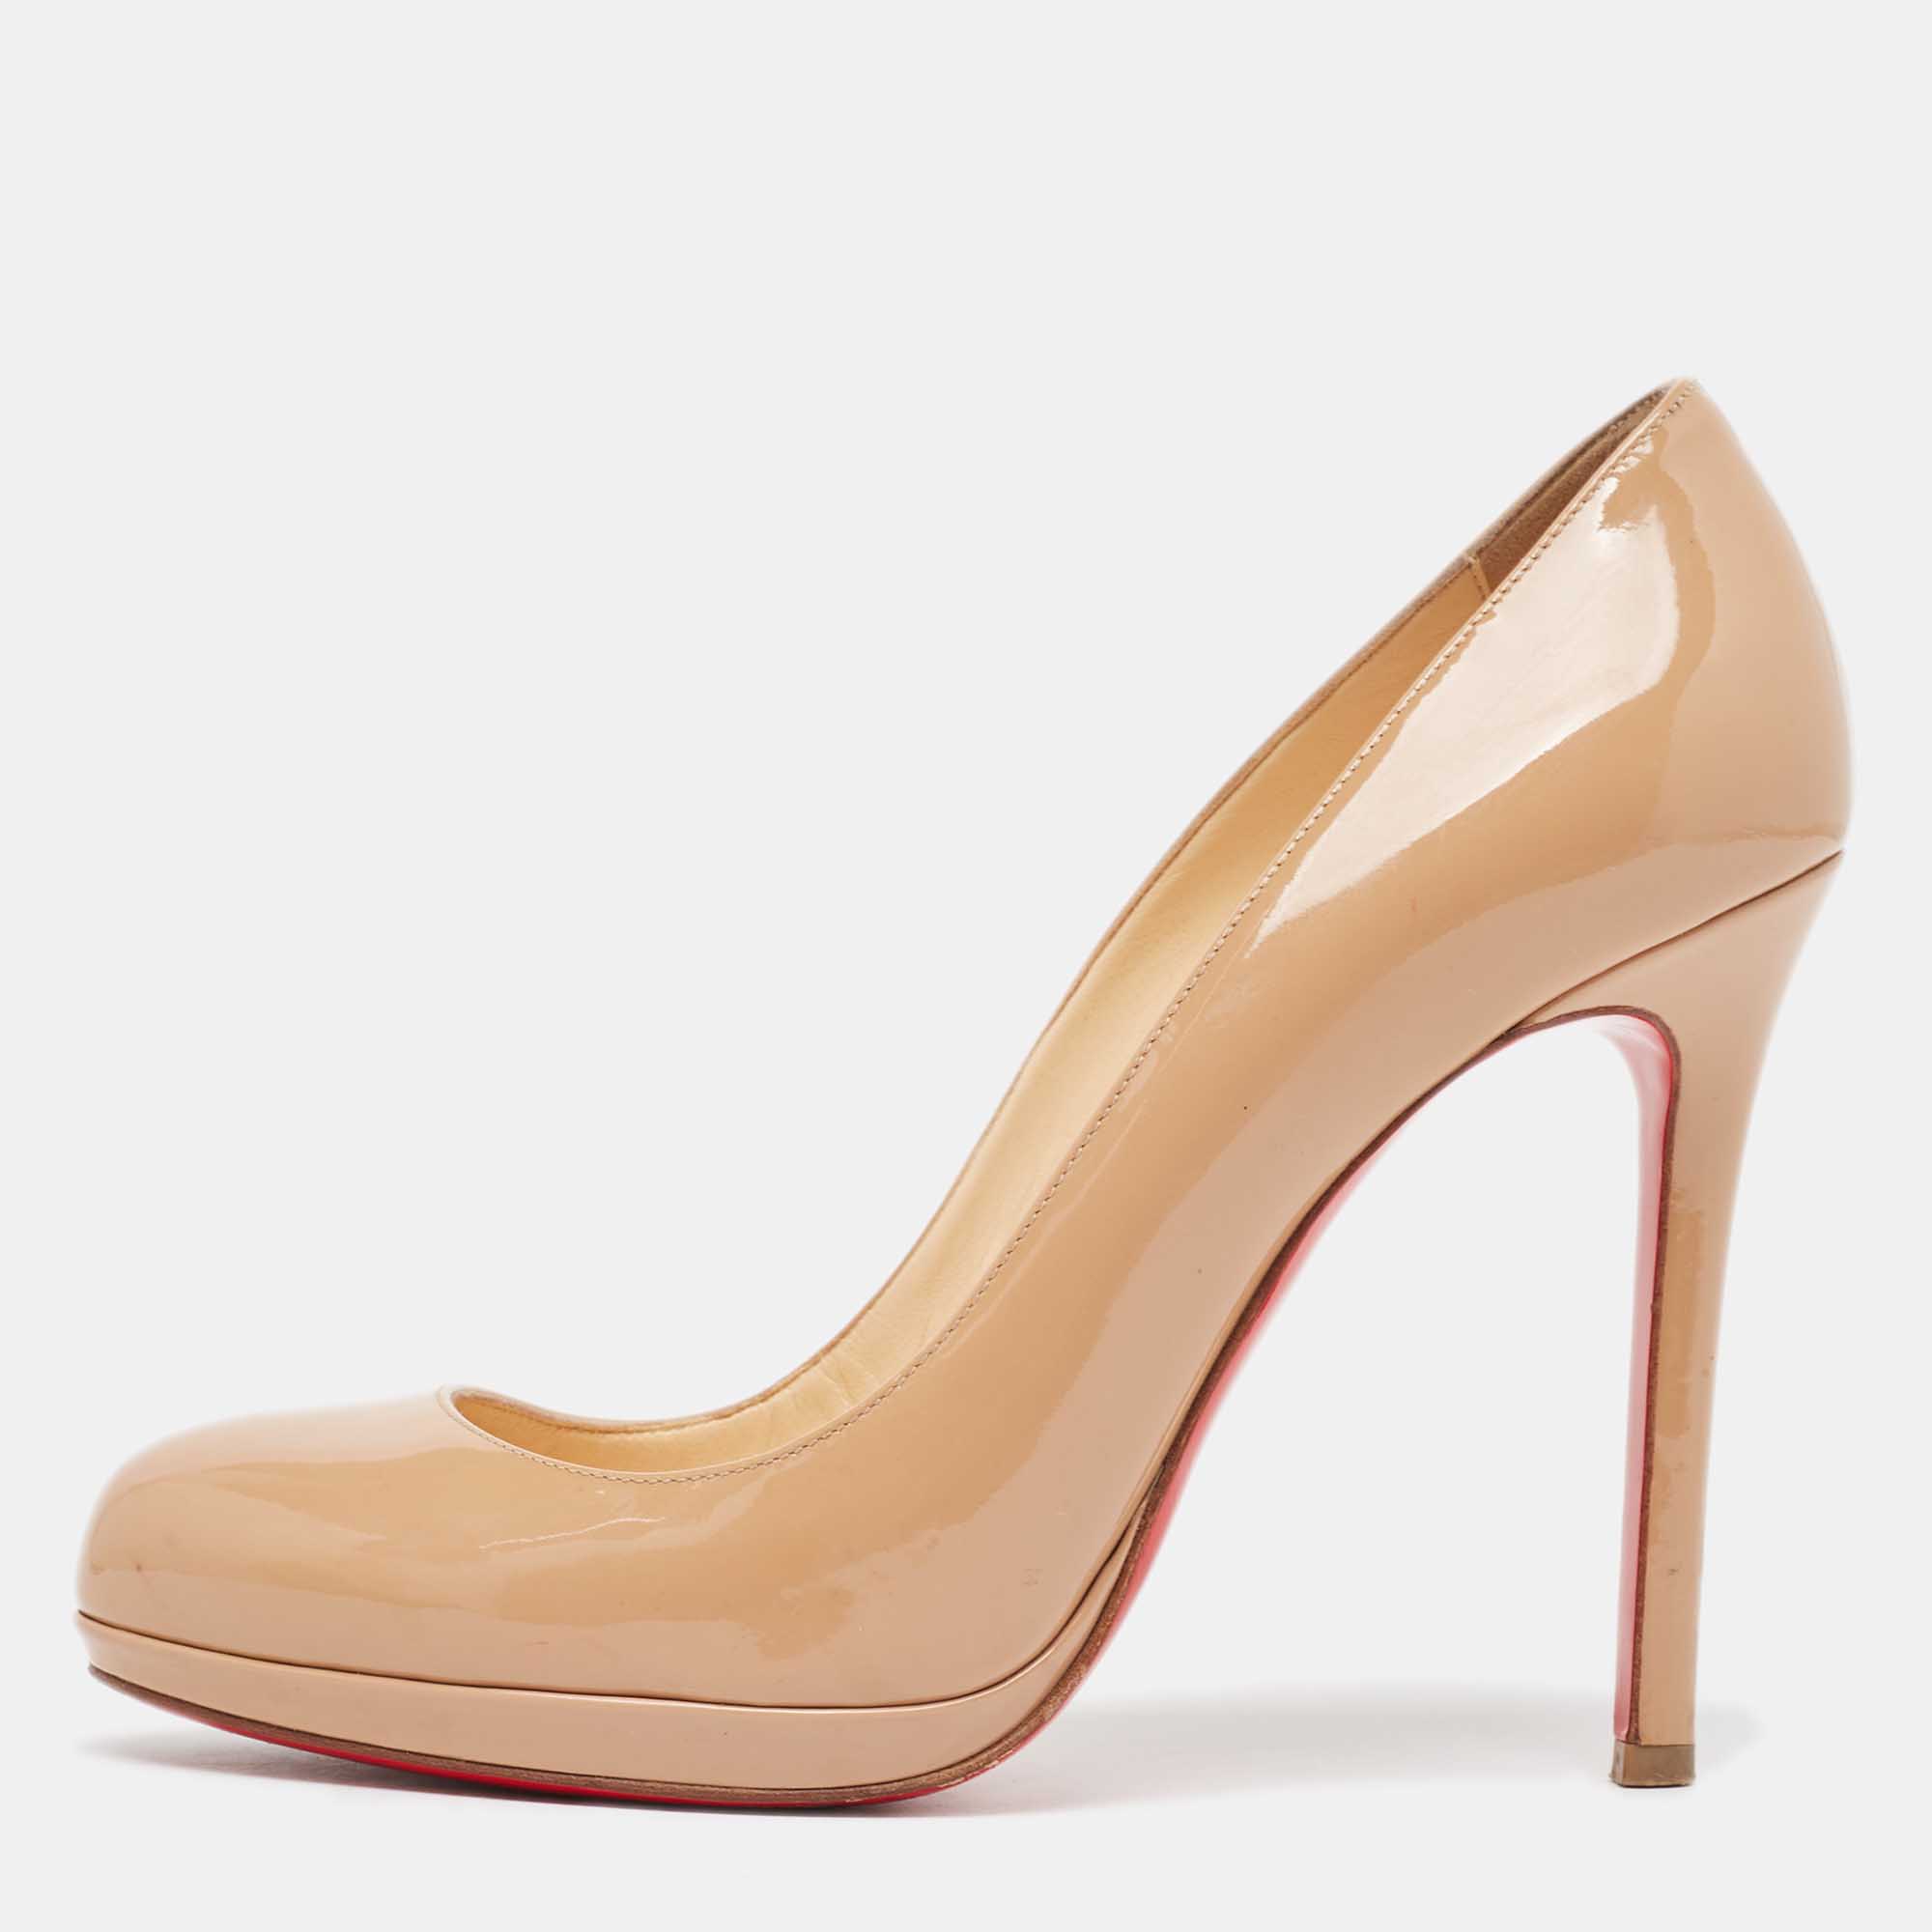 Pre-owned Christian Louboutin Beige Patent Leather New Simple Round Toe Pumps Size 38.5